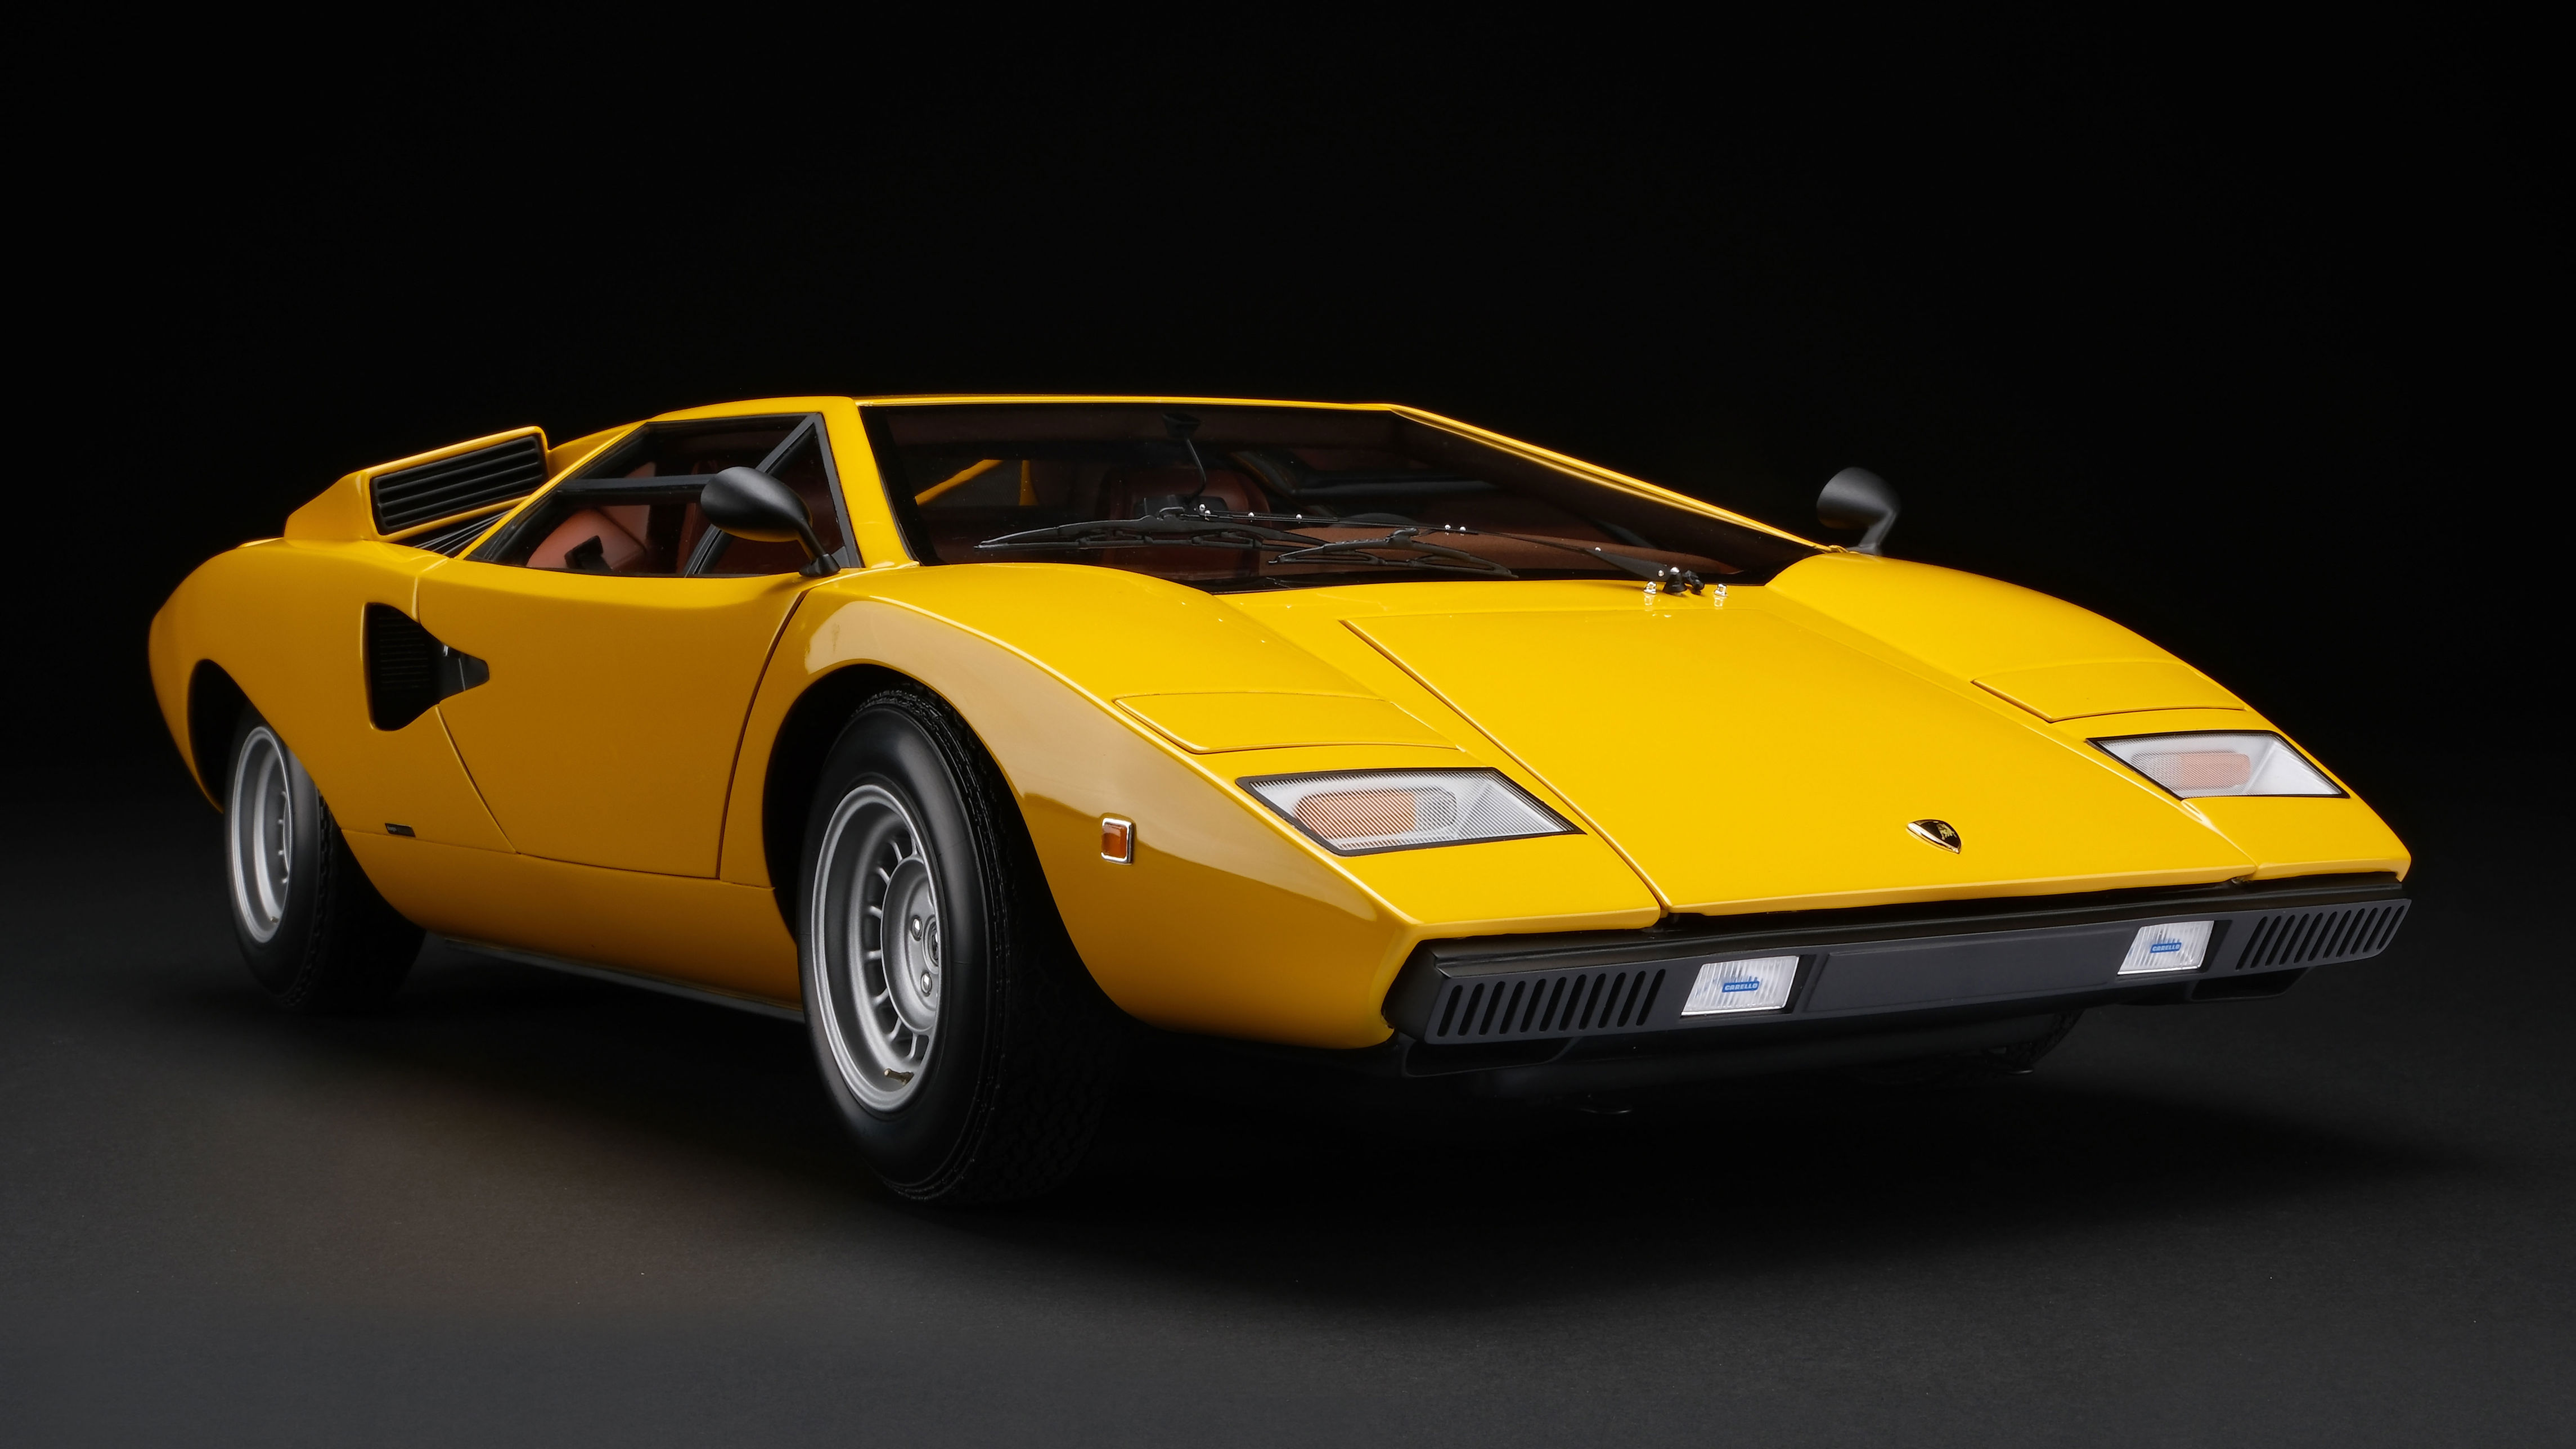 feast your eyes on these stunning lamborghini countach and revuelto 1:8 scale models